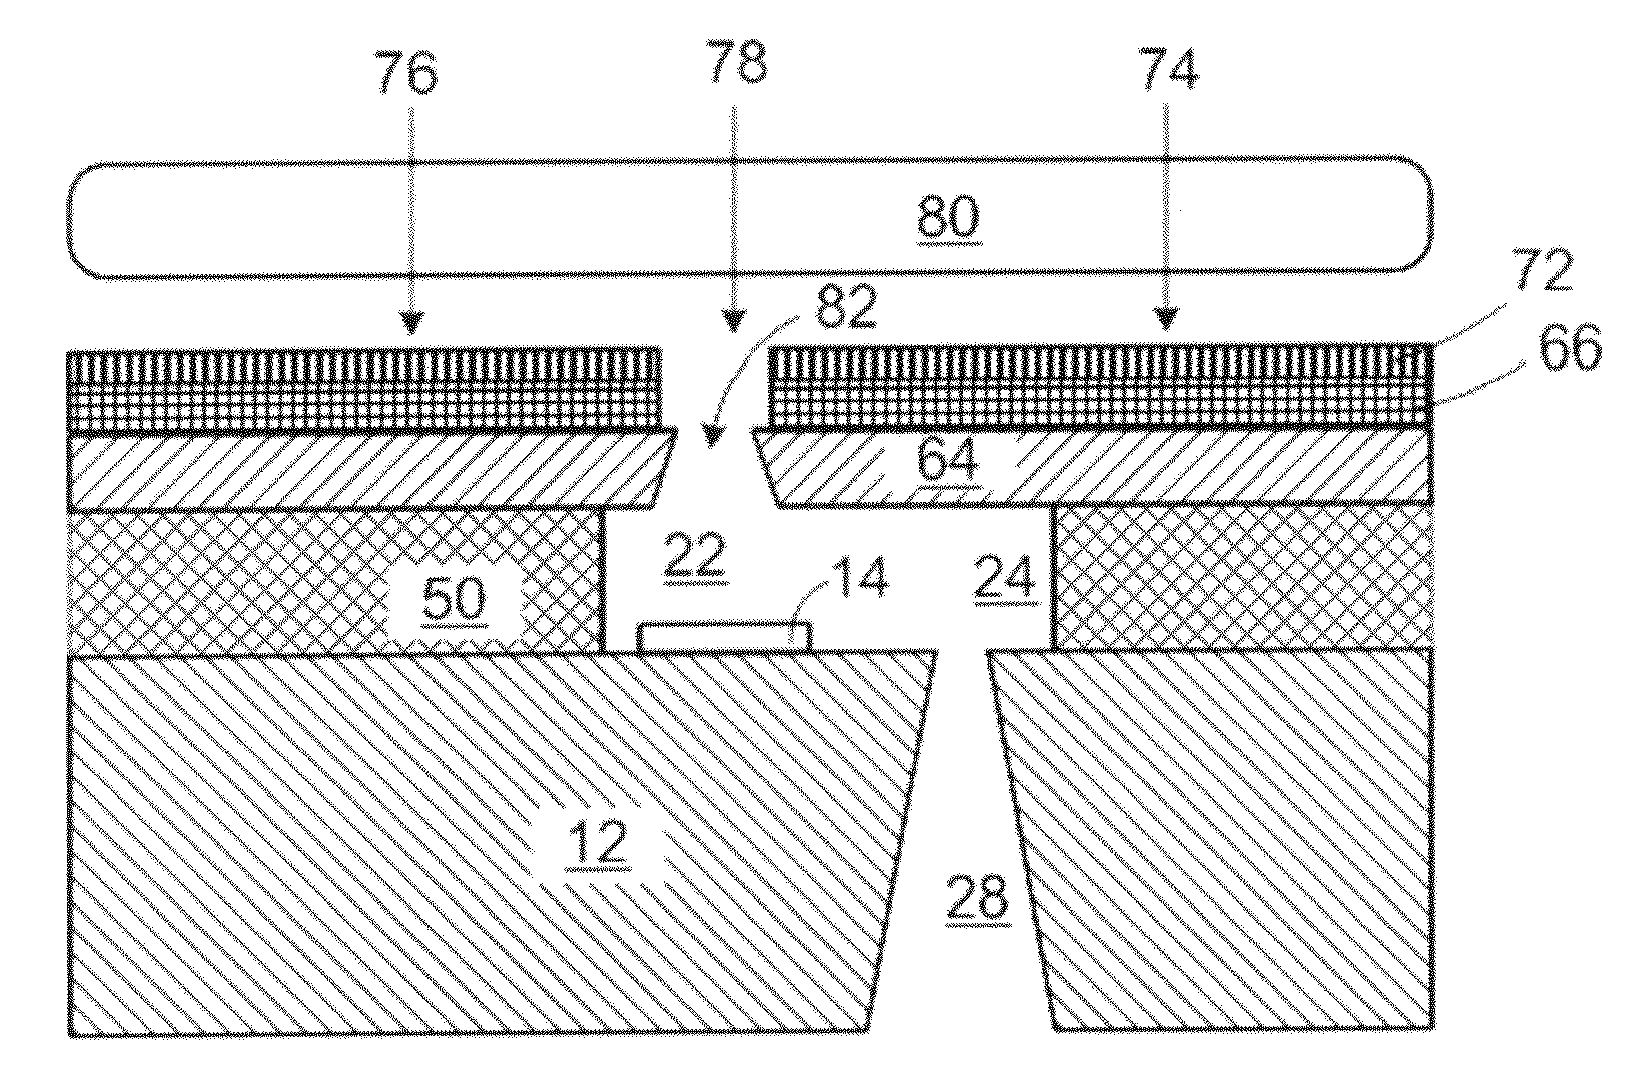 Methods of Etching Polymeric Materials Suitable for Making Micro-Fluid Ejection Heads and Micro-Fluid Ejection Heads Relating Thereto